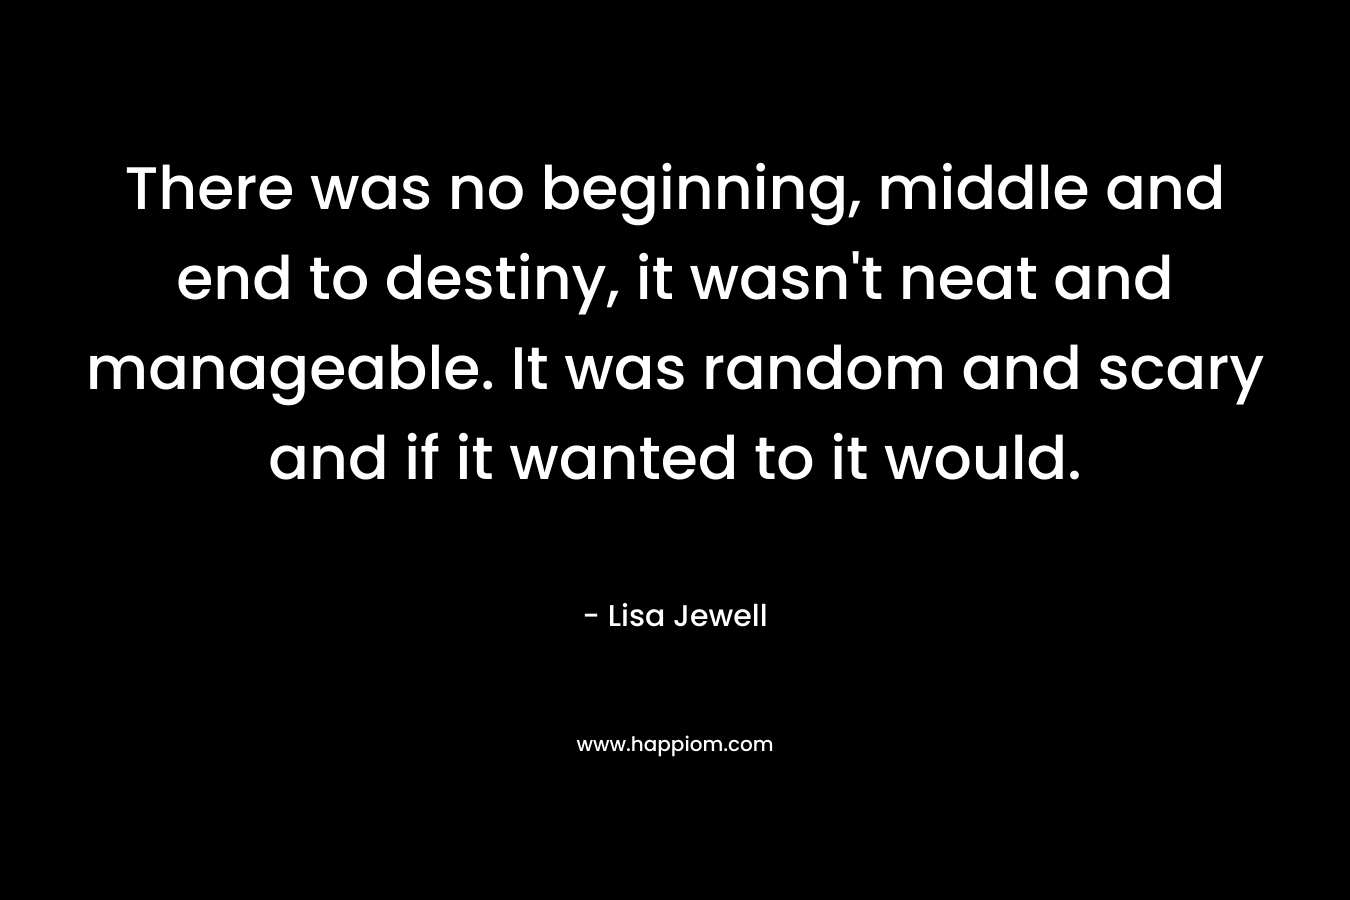 There was no beginning, middle and end to destiny, it wasn't neat and manageable. It was random and scary and if it wanted to it would.